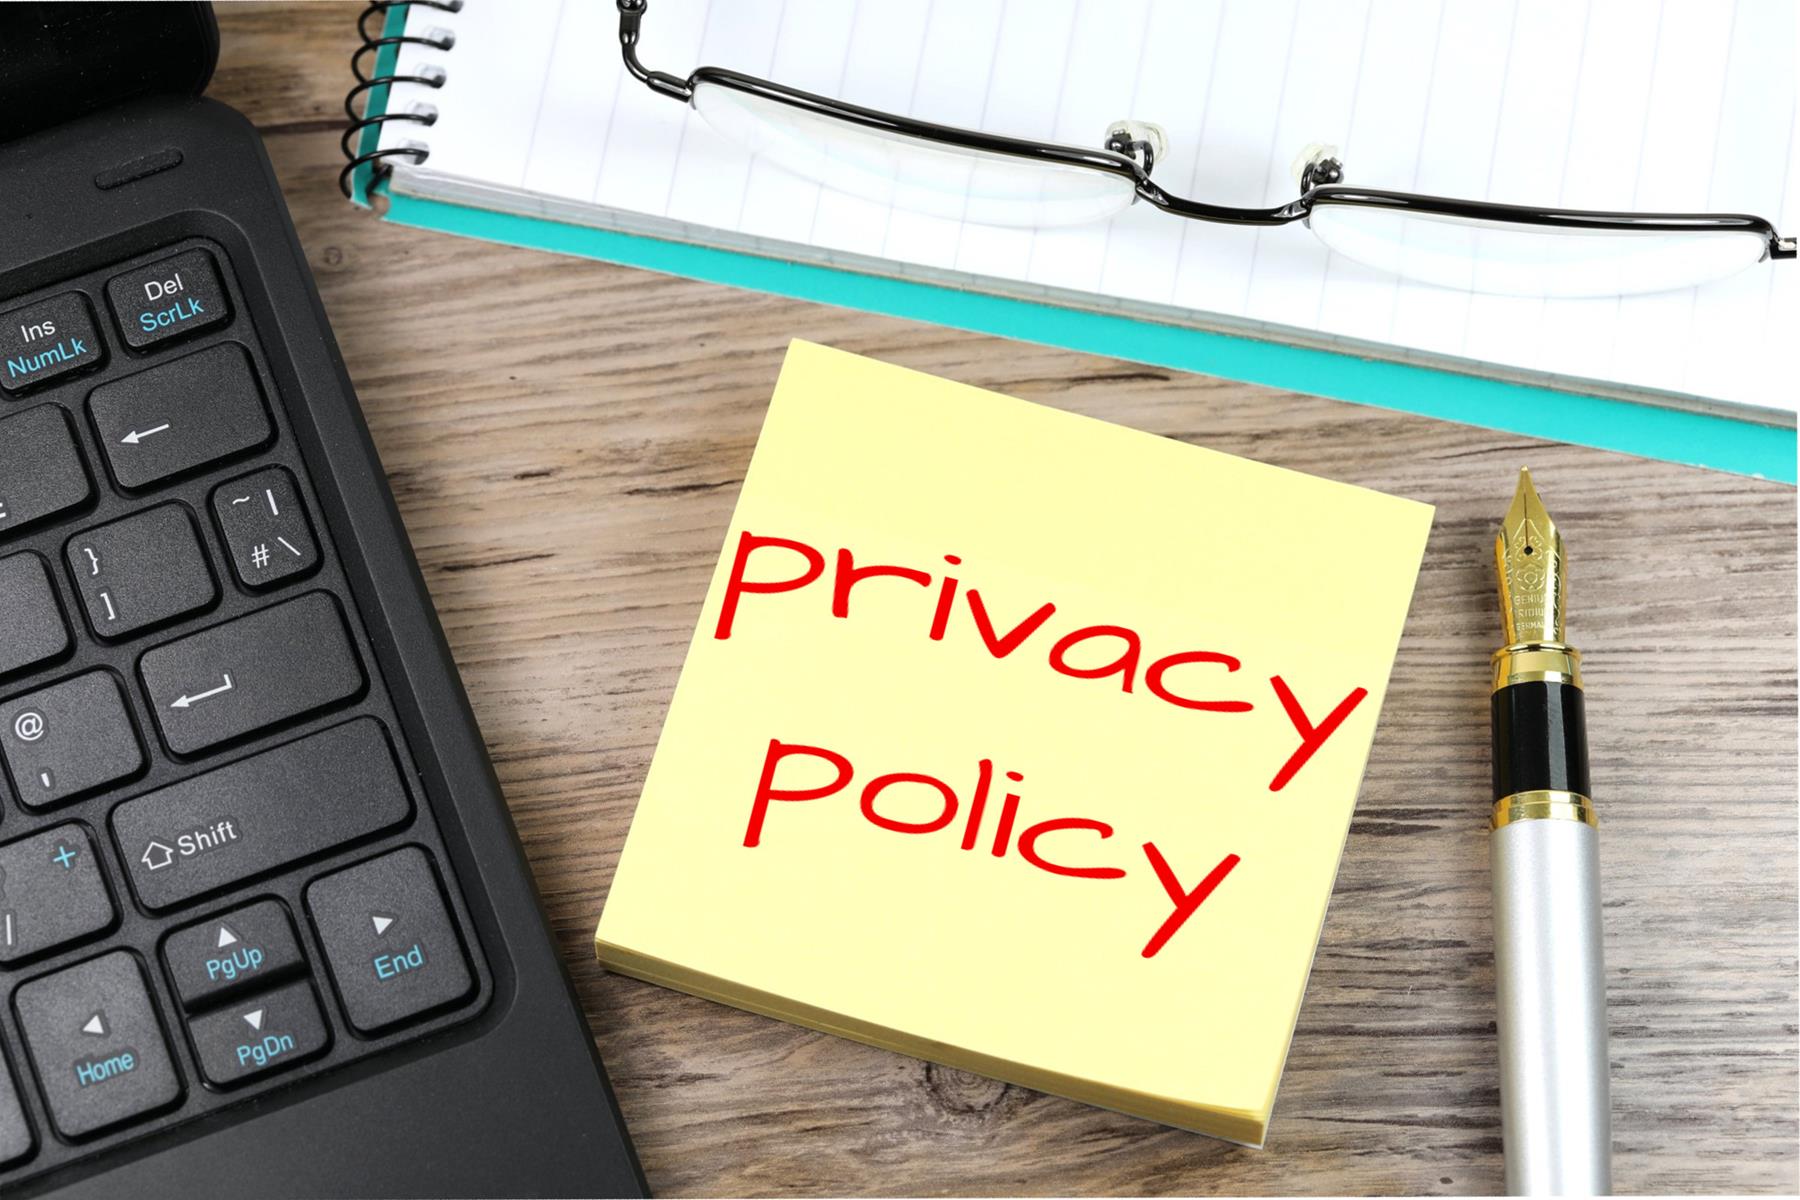 Privacy Policy - Free of Charge Creative Commons Post it Note image